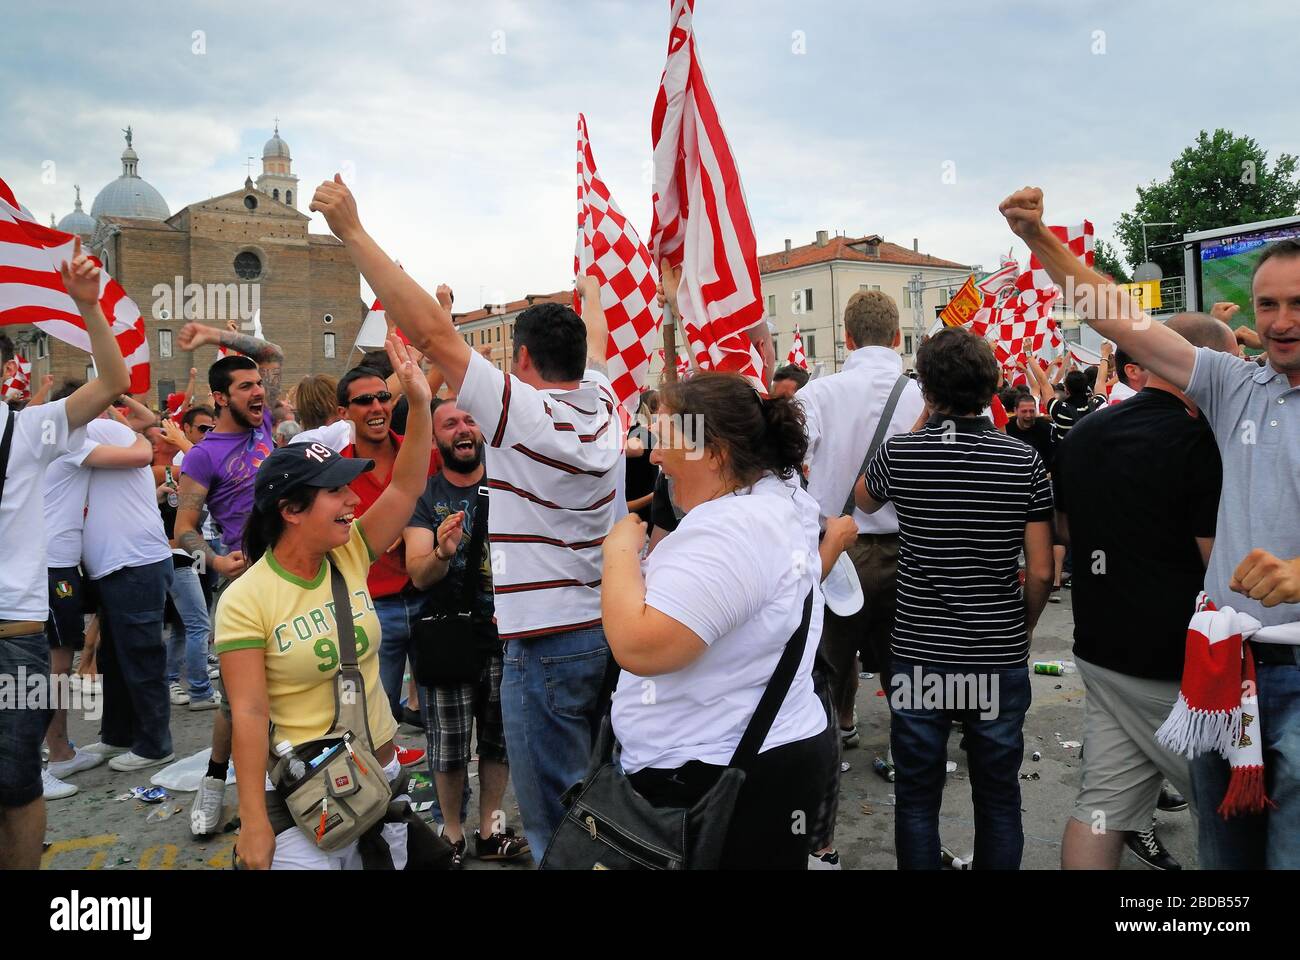 Ultras Fans Stock Photos Ultras Fans Stock Images Alamy